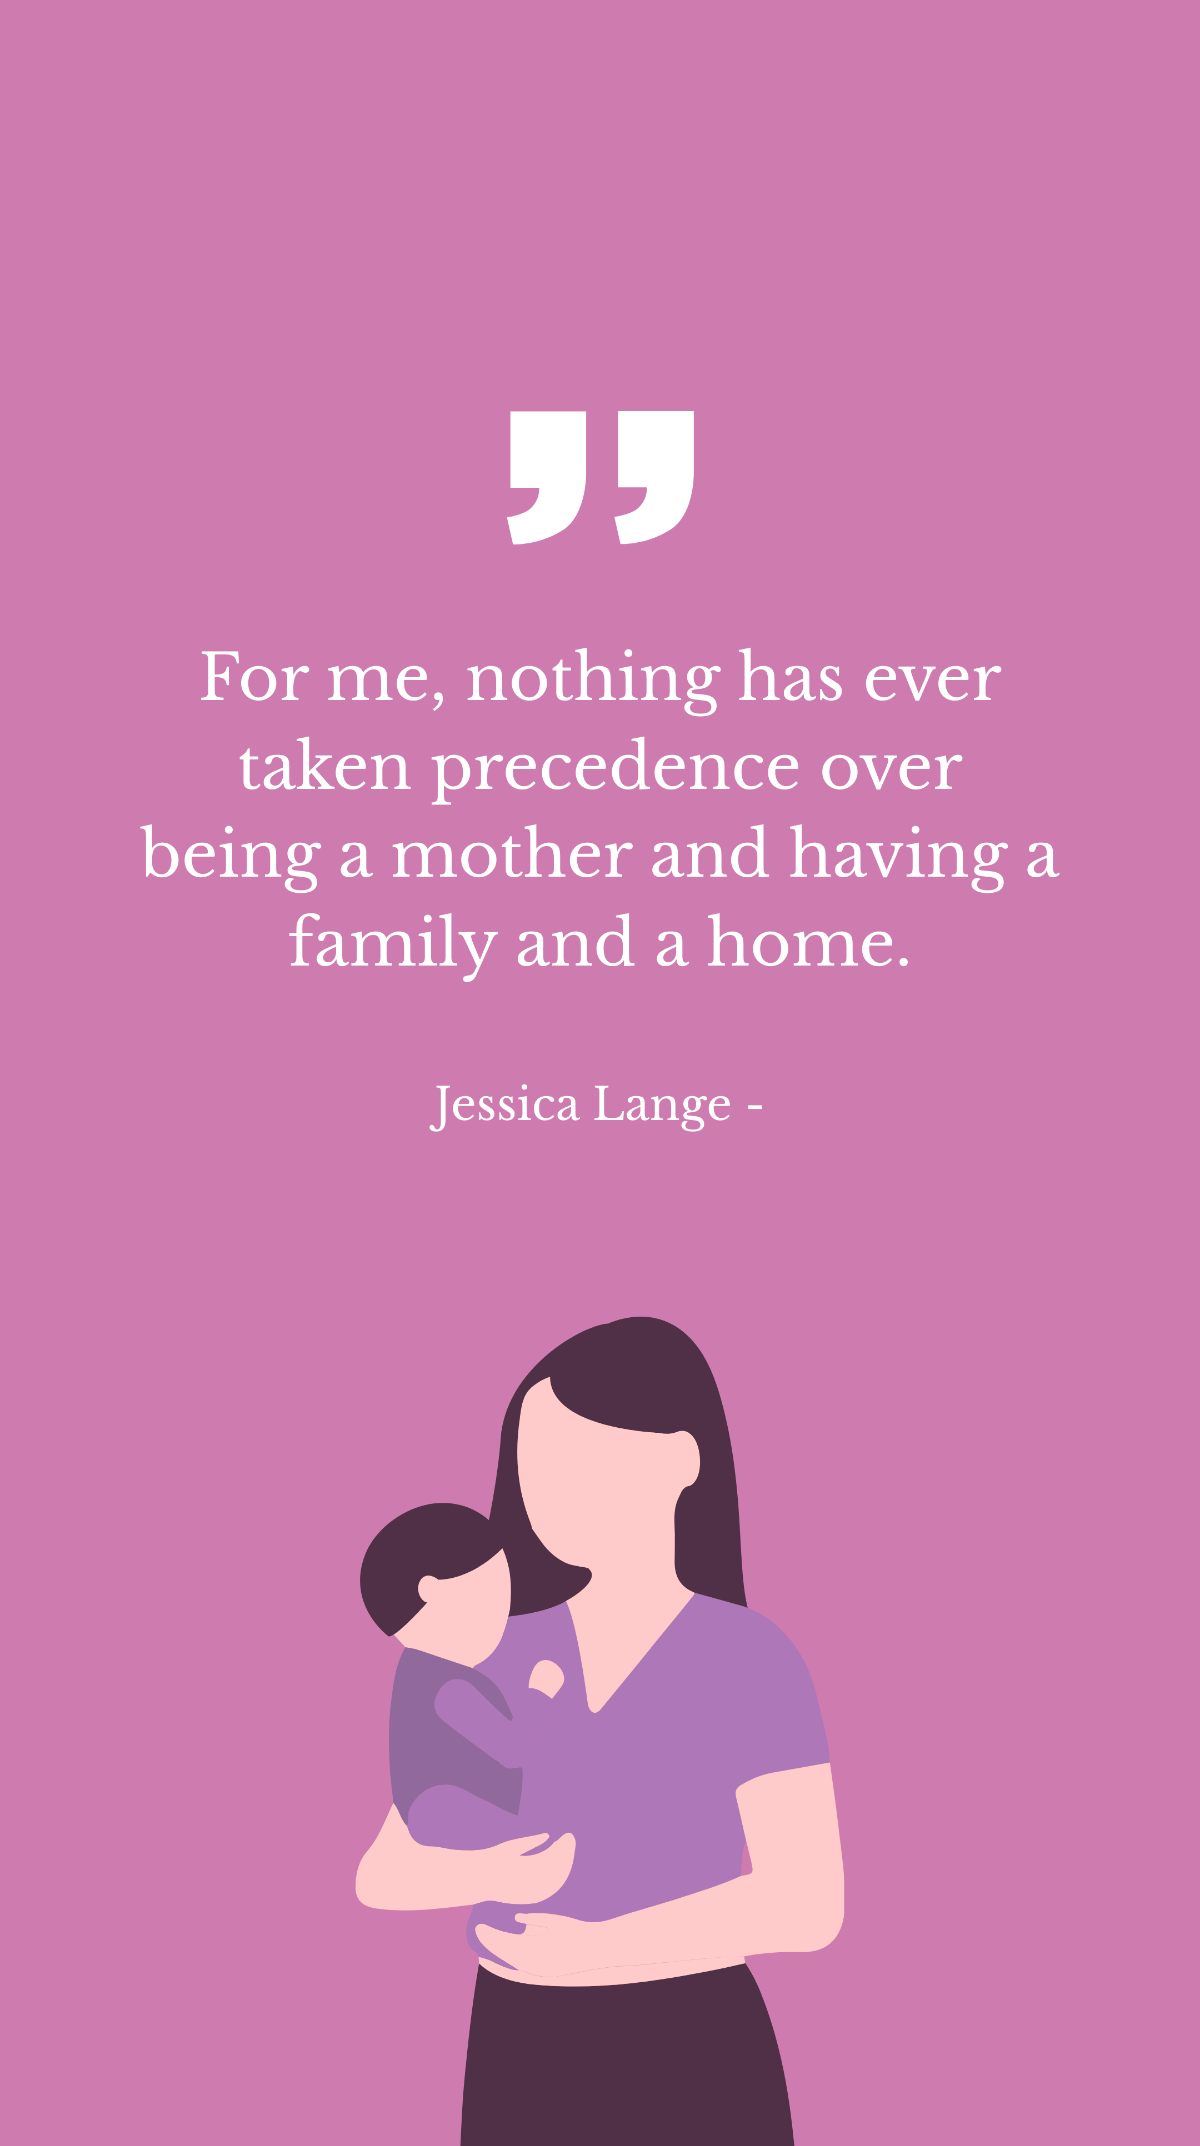 Jessica Lange - For me, nothing has ever taken precedence over being a mother and having a family and a home. Template